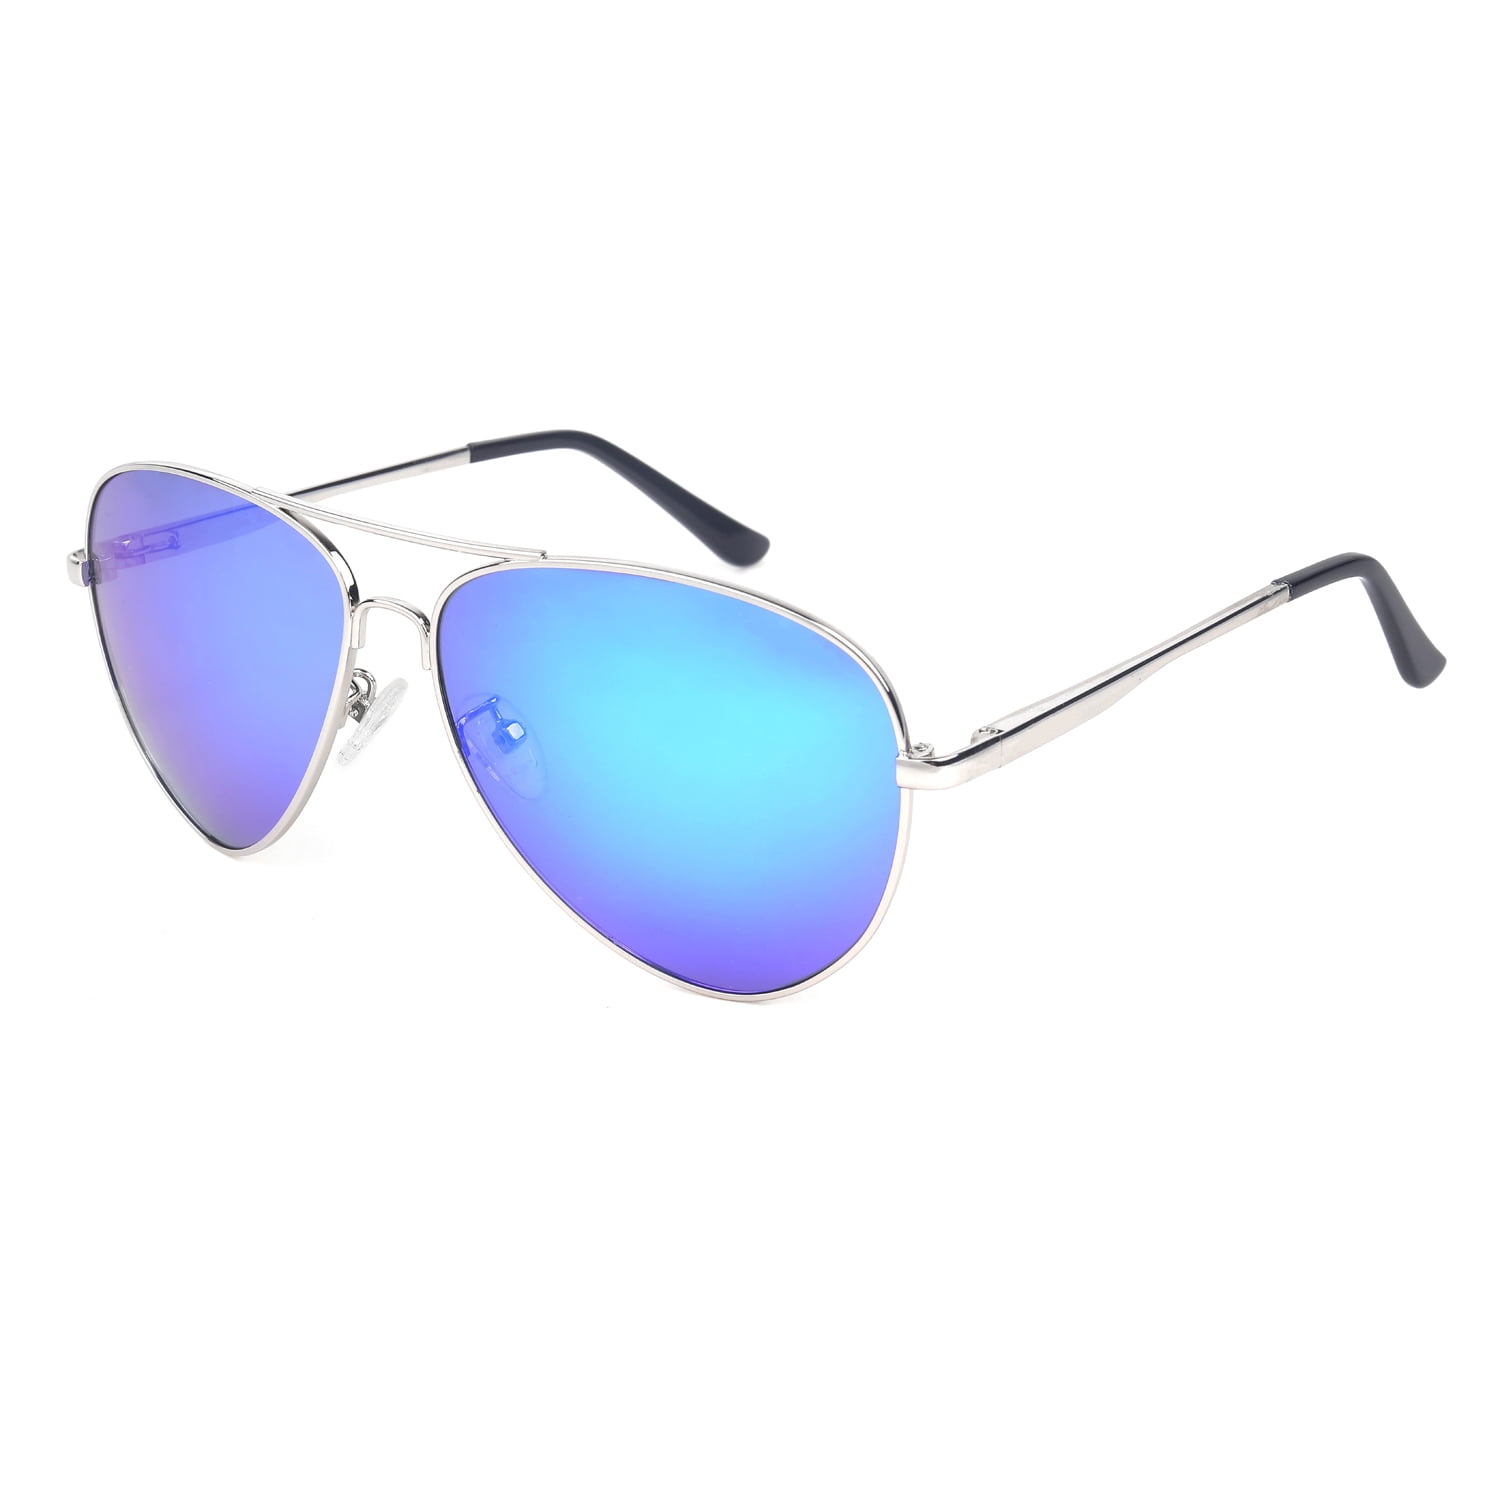 JUST GO Metal Frame Vintage Protection, with Polarized Style Blue Revo Sunglasses Matte Lenses, Case, Aviator UV 100% Gold